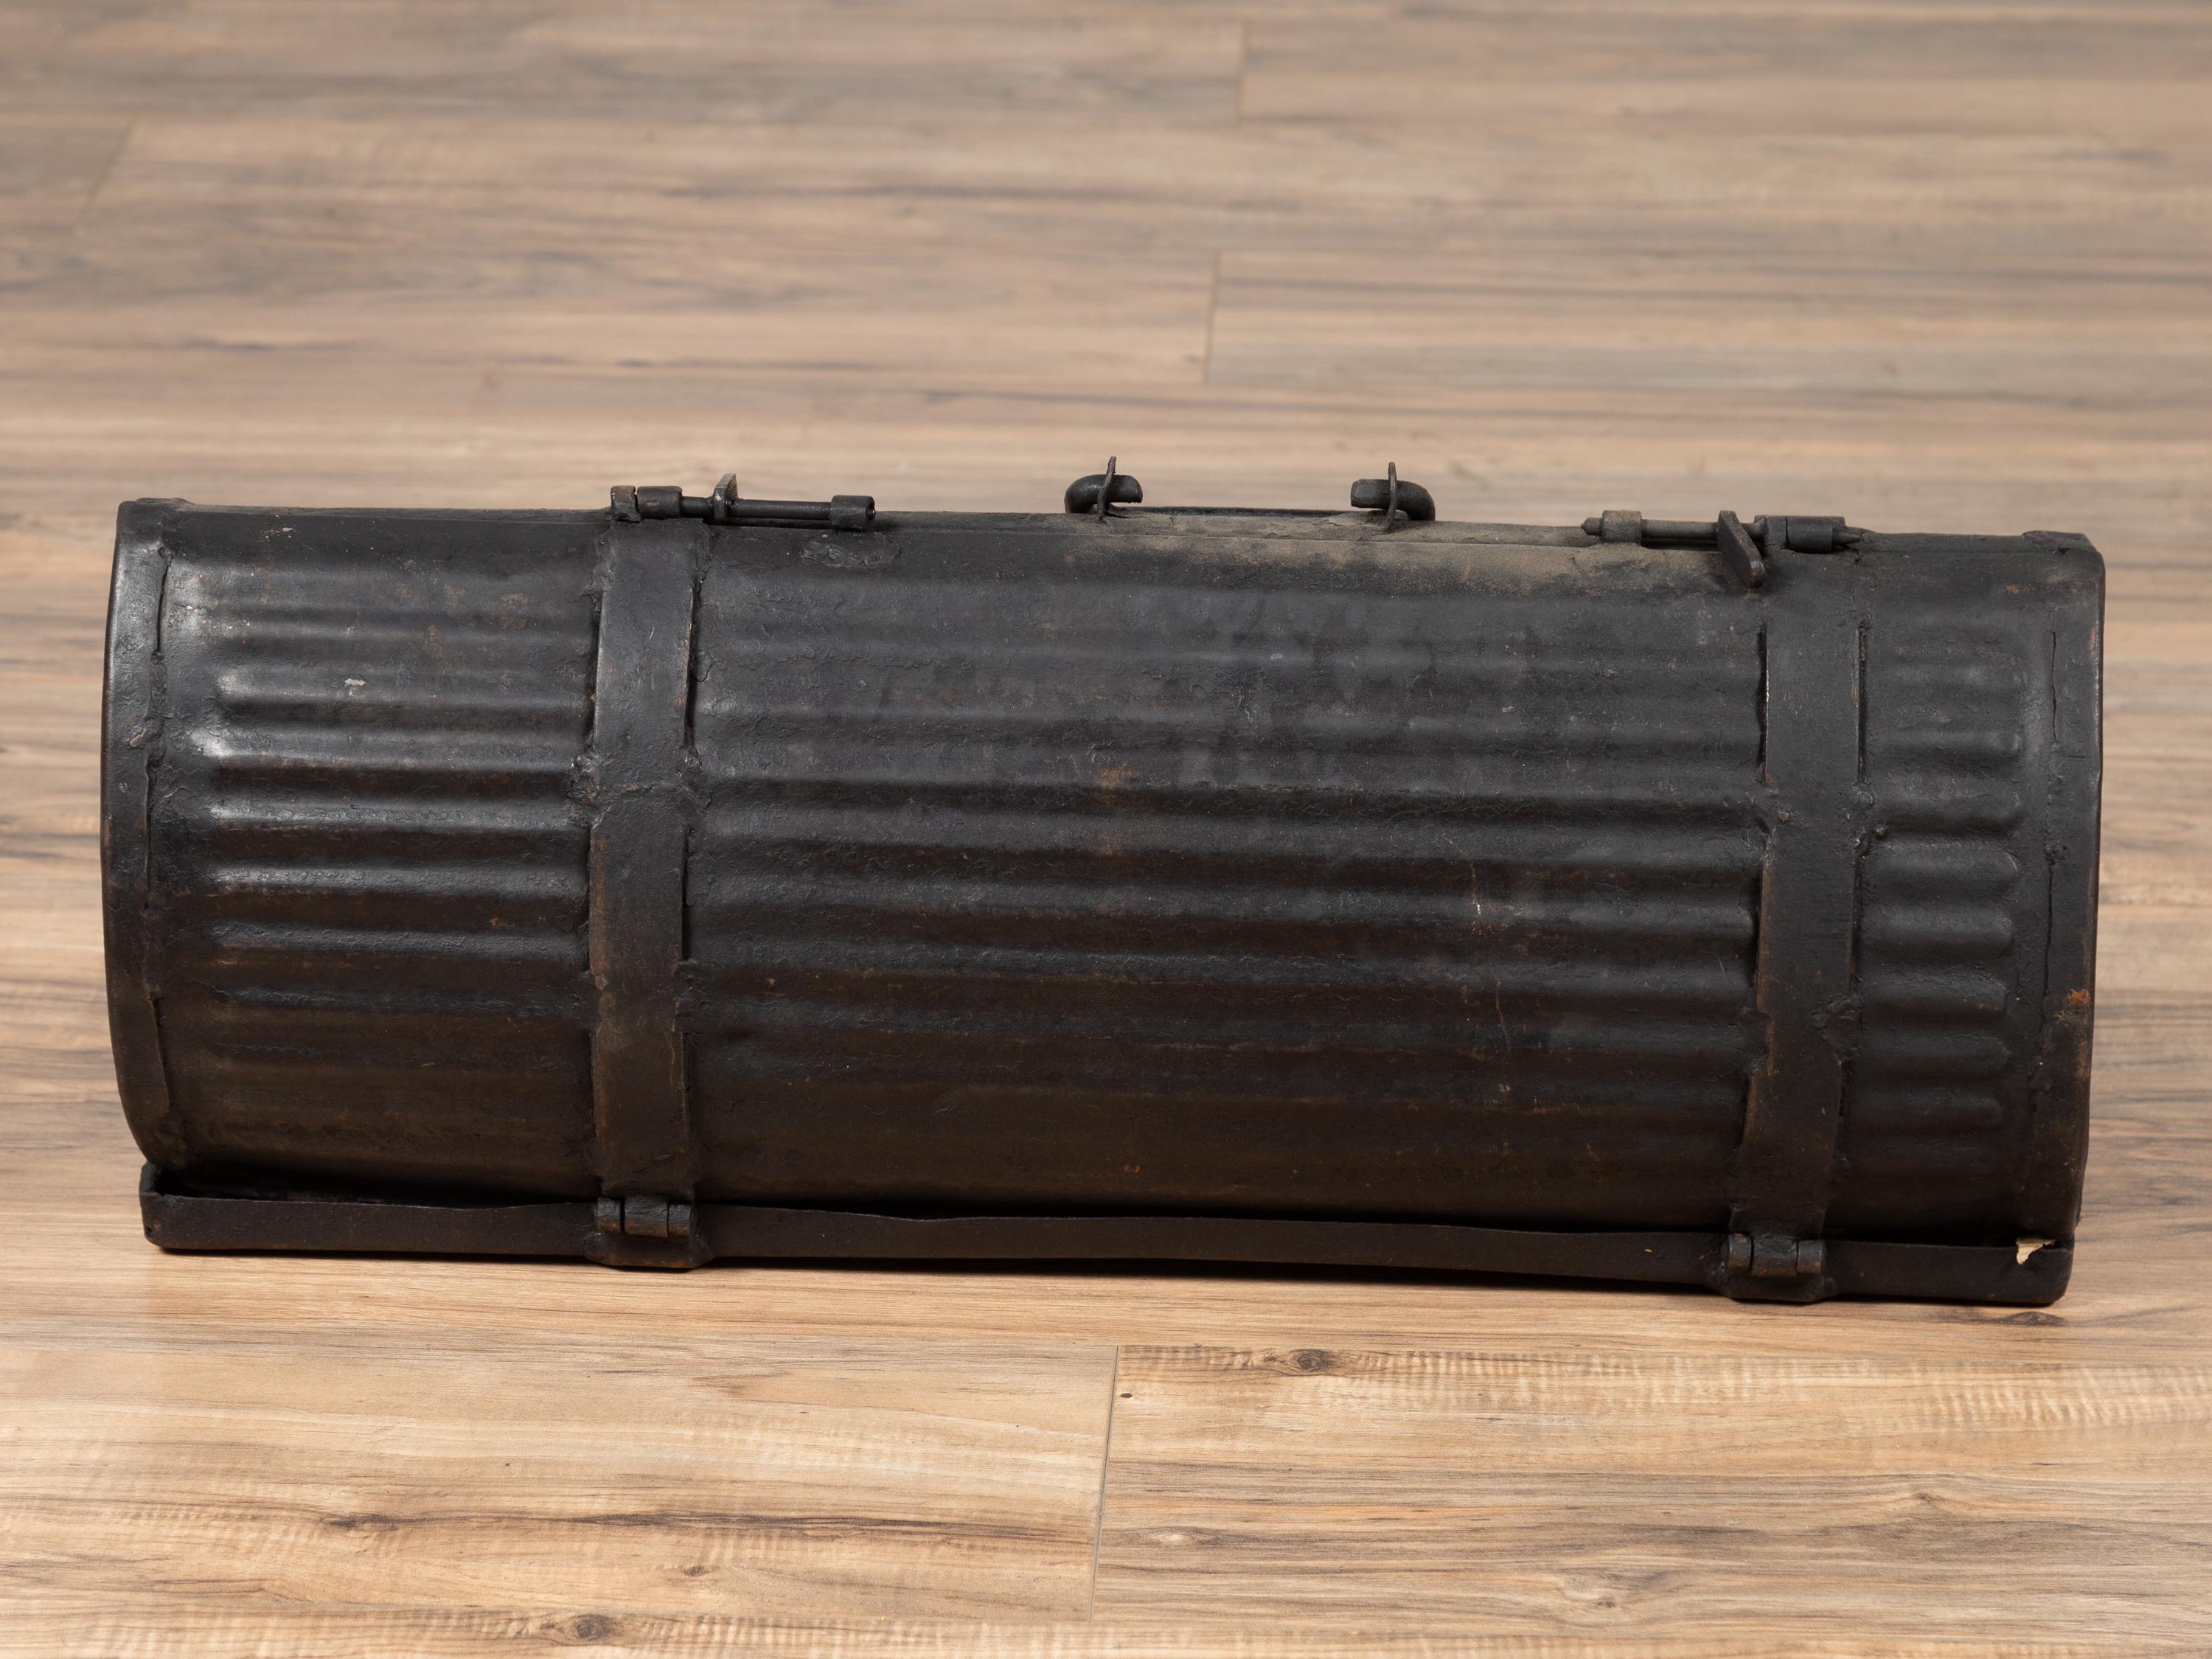 An antique rustic metal tool box from the early 20th century, found in India. Presenting a dark patina and ribbed surface, this antique metal tool box opens up thanks to small latches and both sides unfold around the central section. With its rustic